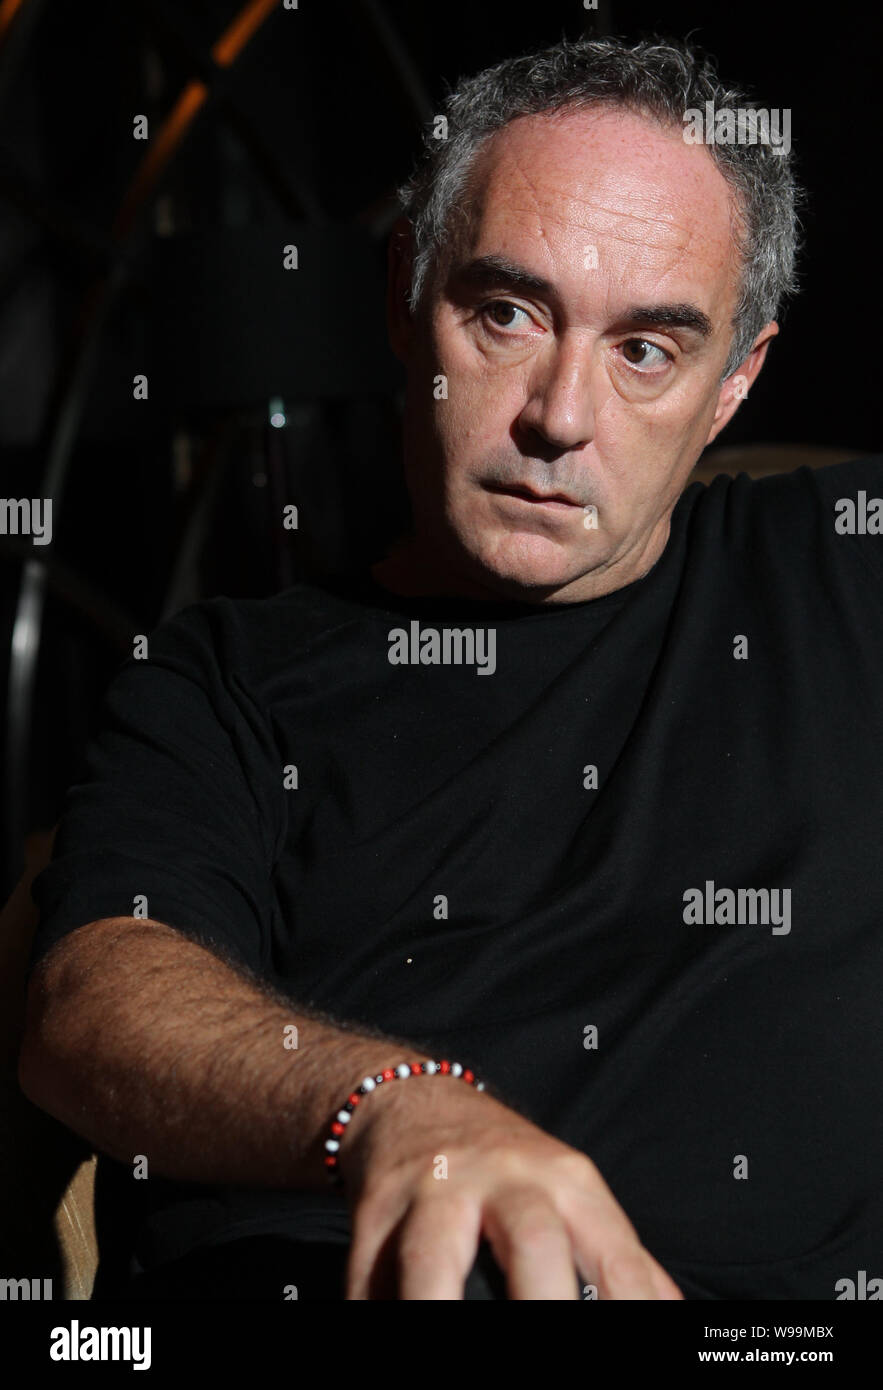 Southern Spains most celebrated chef  Ferran Adria is pictured in Shanghai, China, 23 August 2011.   Ferran Adria is in China to present his well know Stock Photo